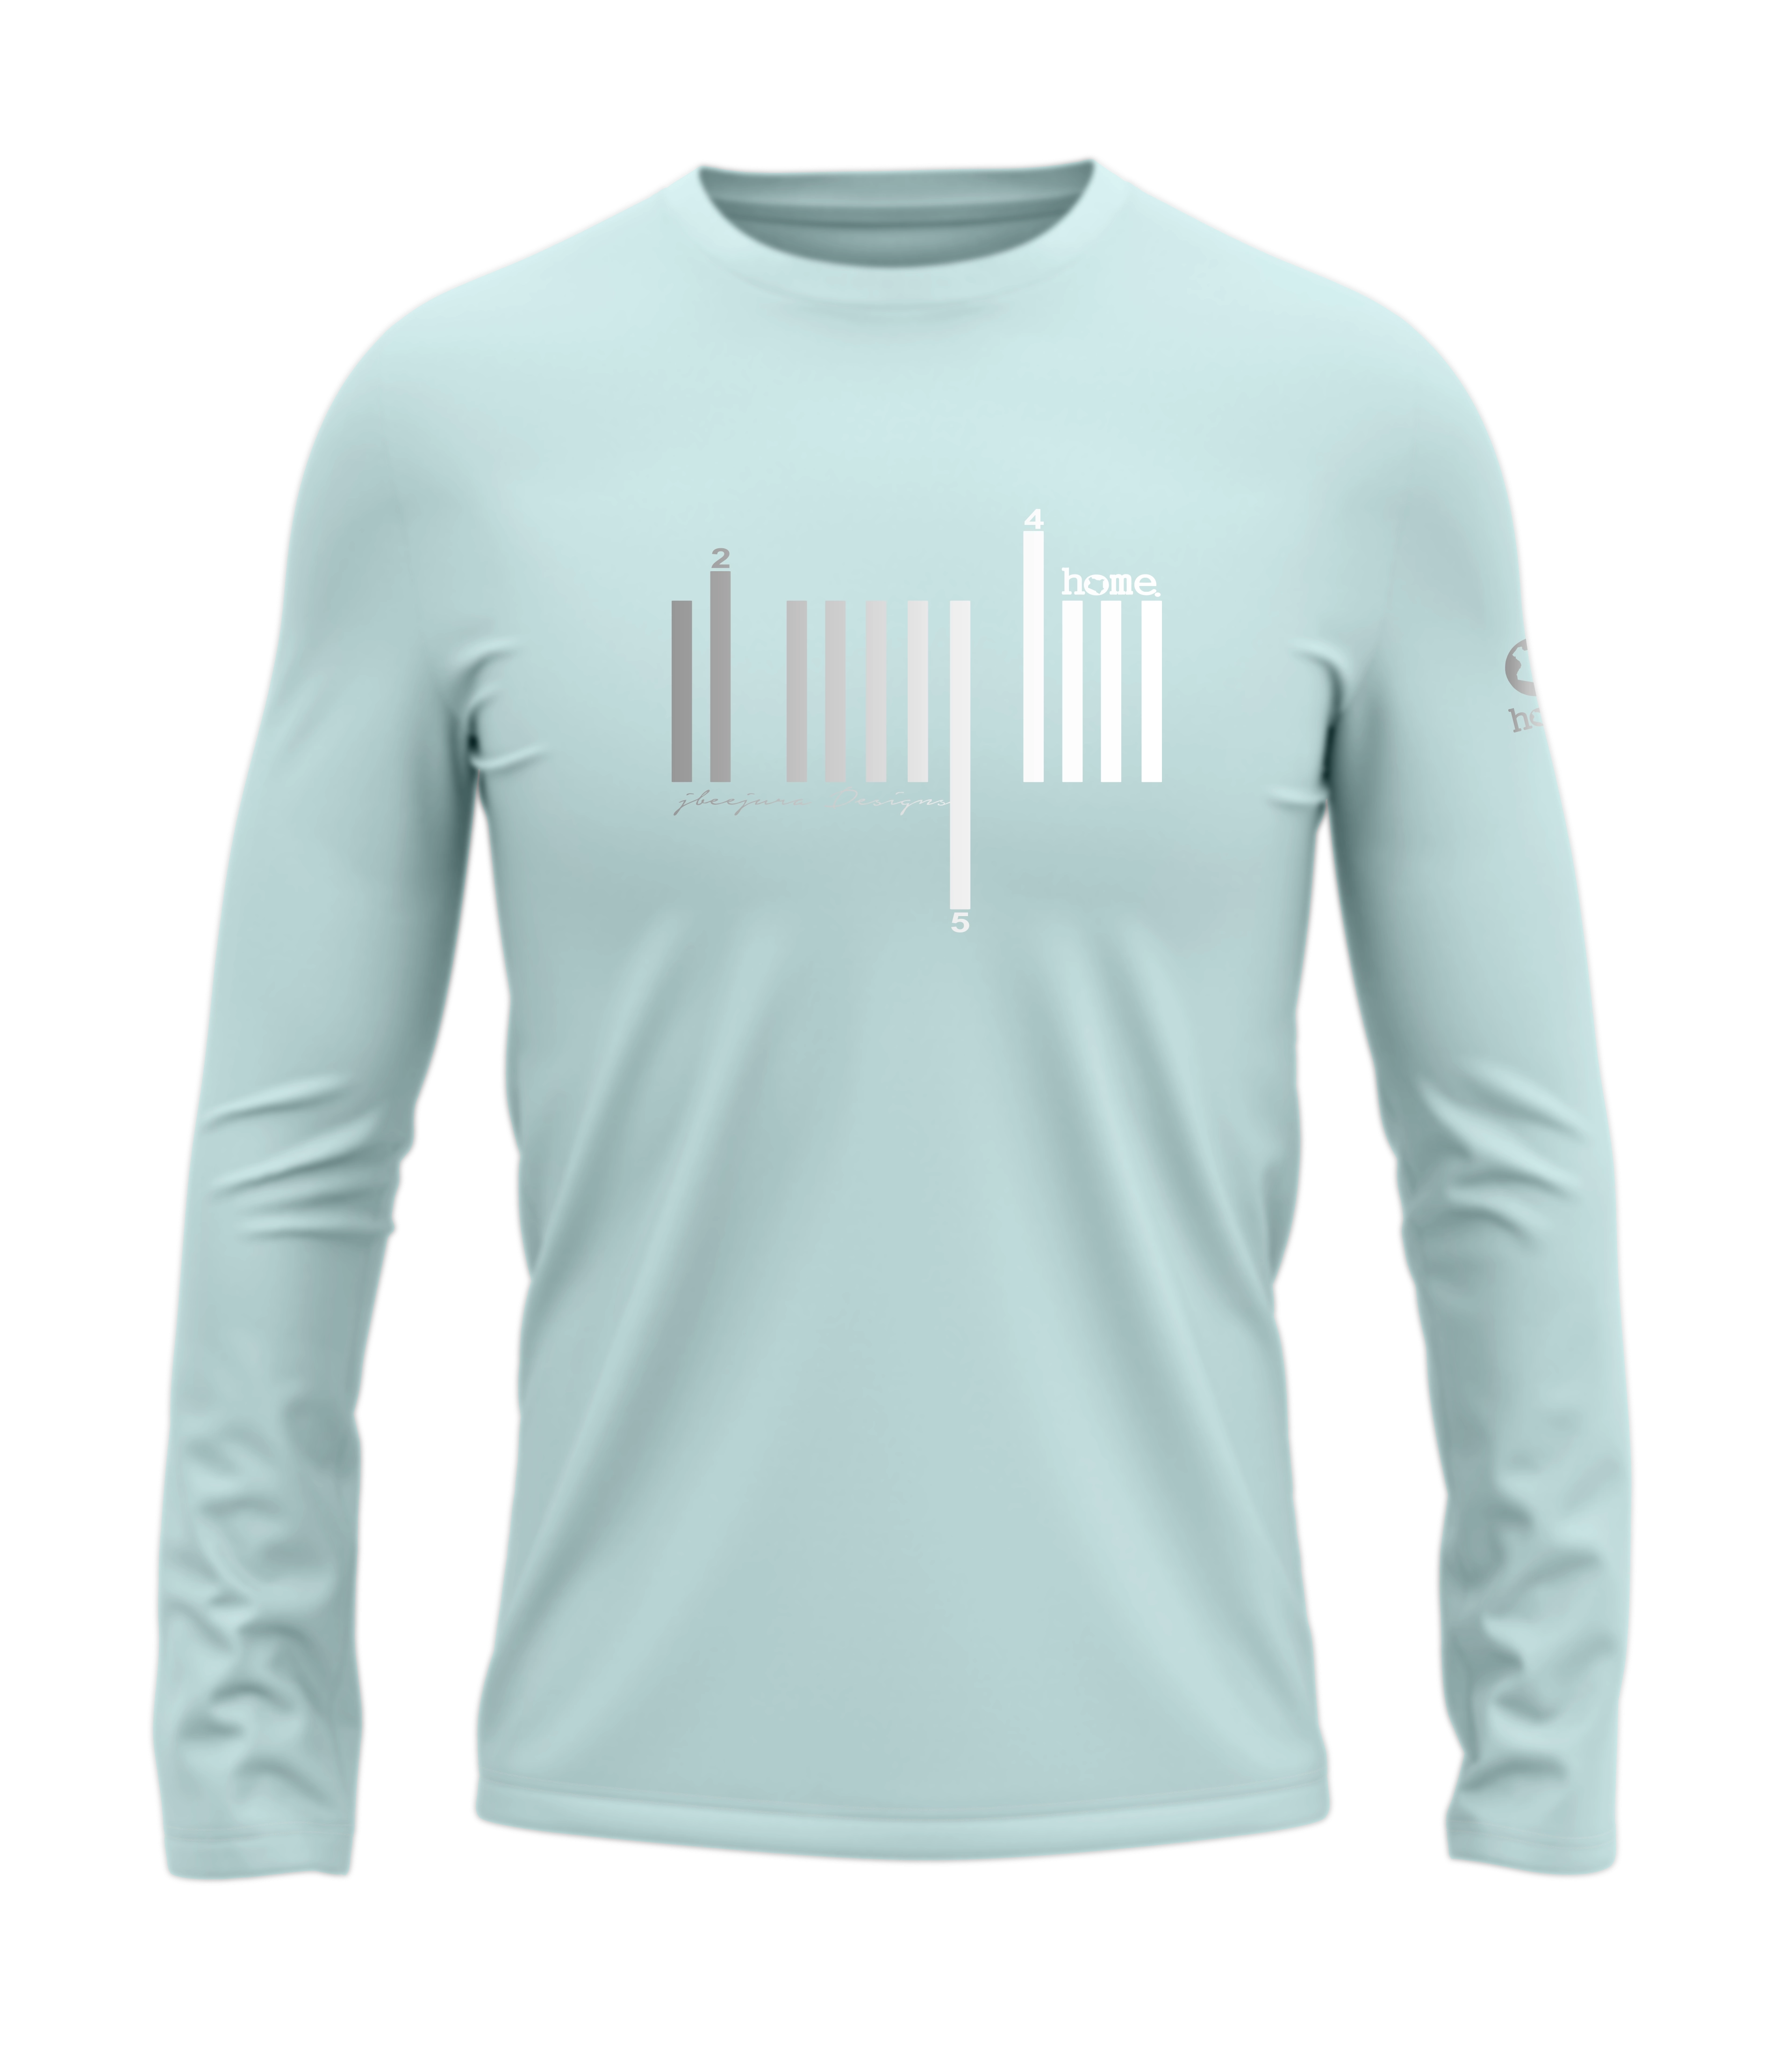 home_254 LONG-SLEEVED MISTY BLUE T-SHIRT WITH A SILVER BARS PRINT – COTTON PLUS FABRIC